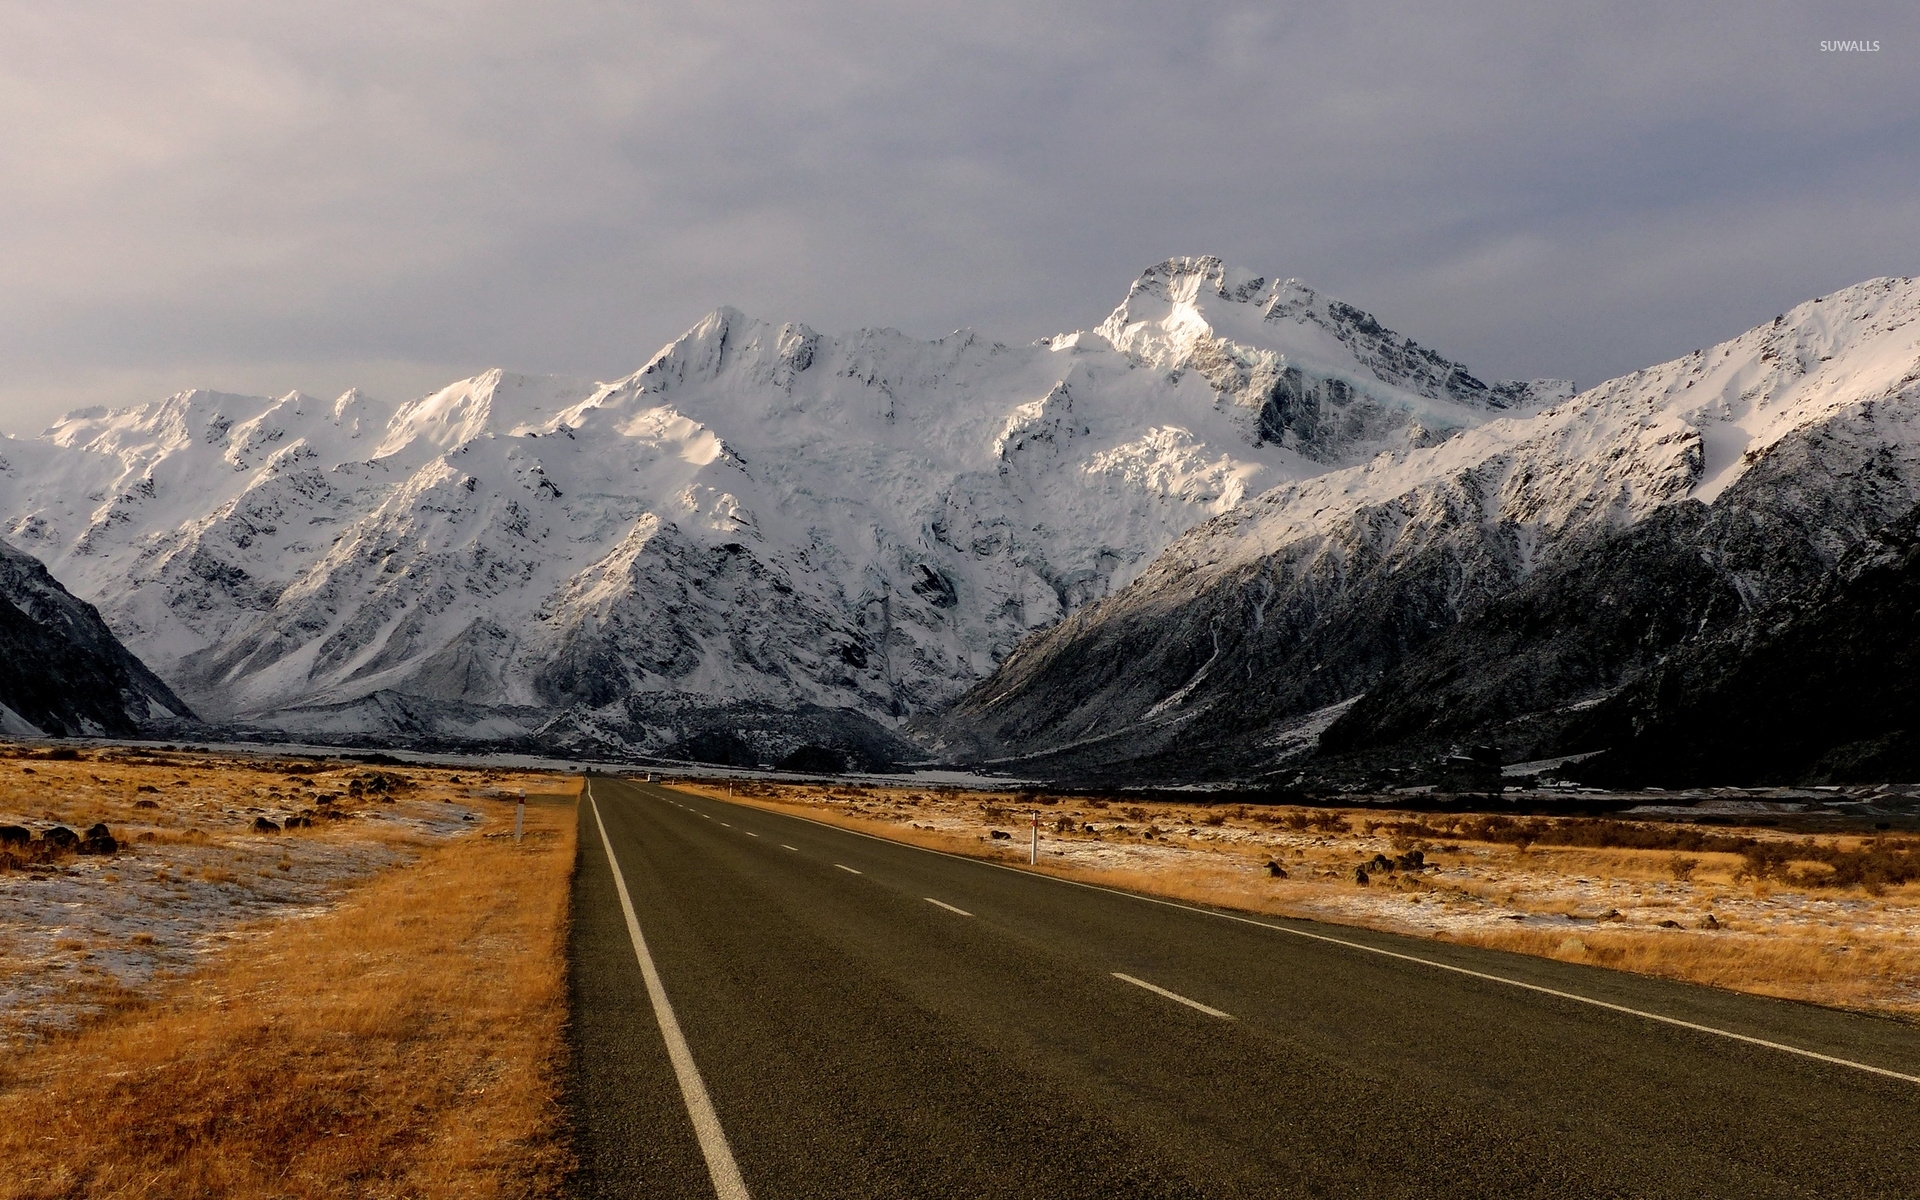 Road towards the snowy mountains [3] wallpaper - Nature wallpapers - #43771